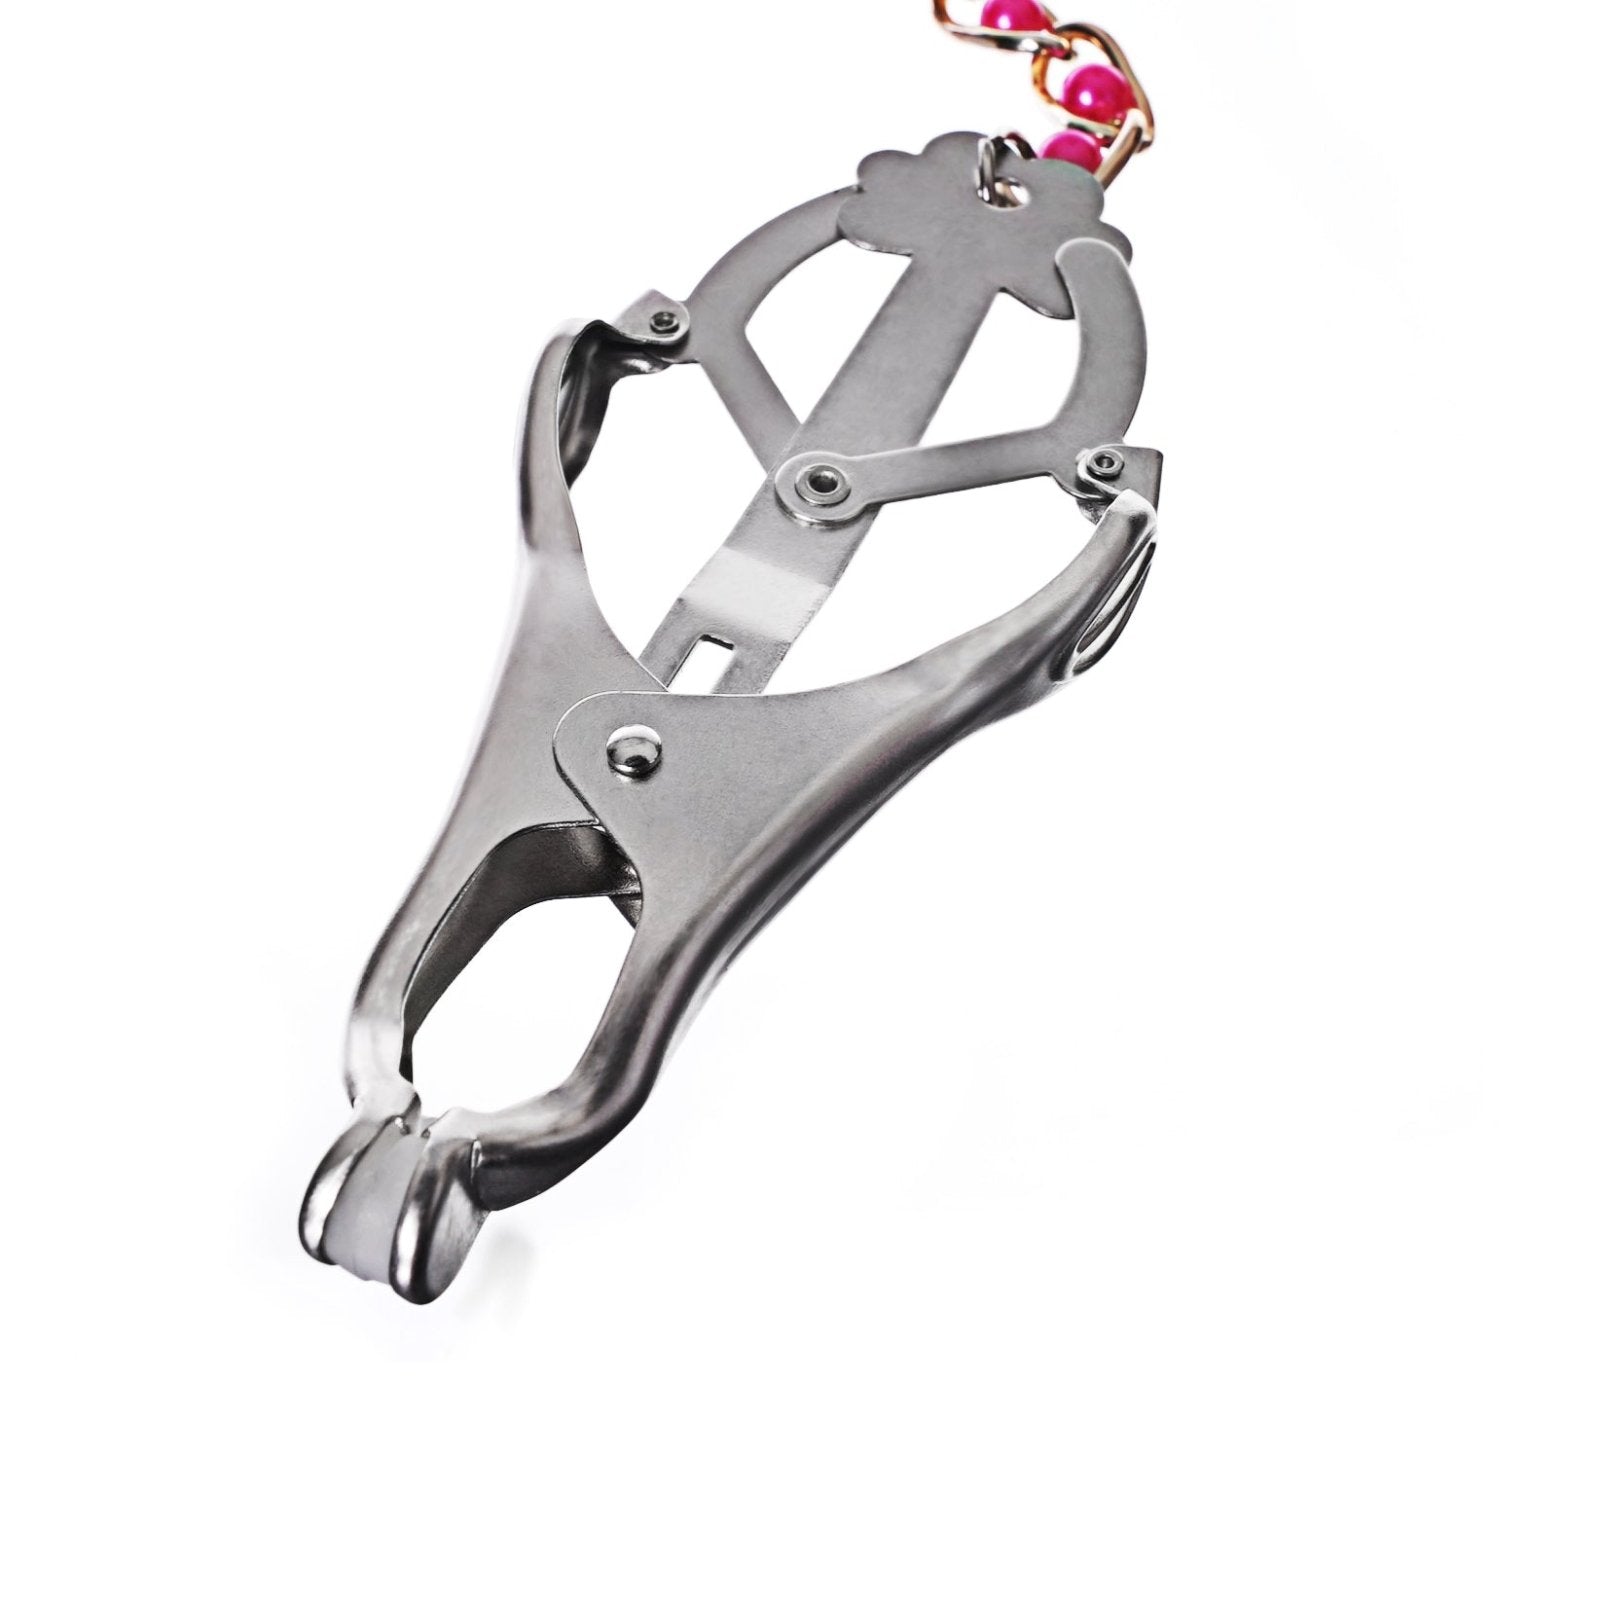 Base By Kink Clover Clamps with Red Ball Chain - Kink Store